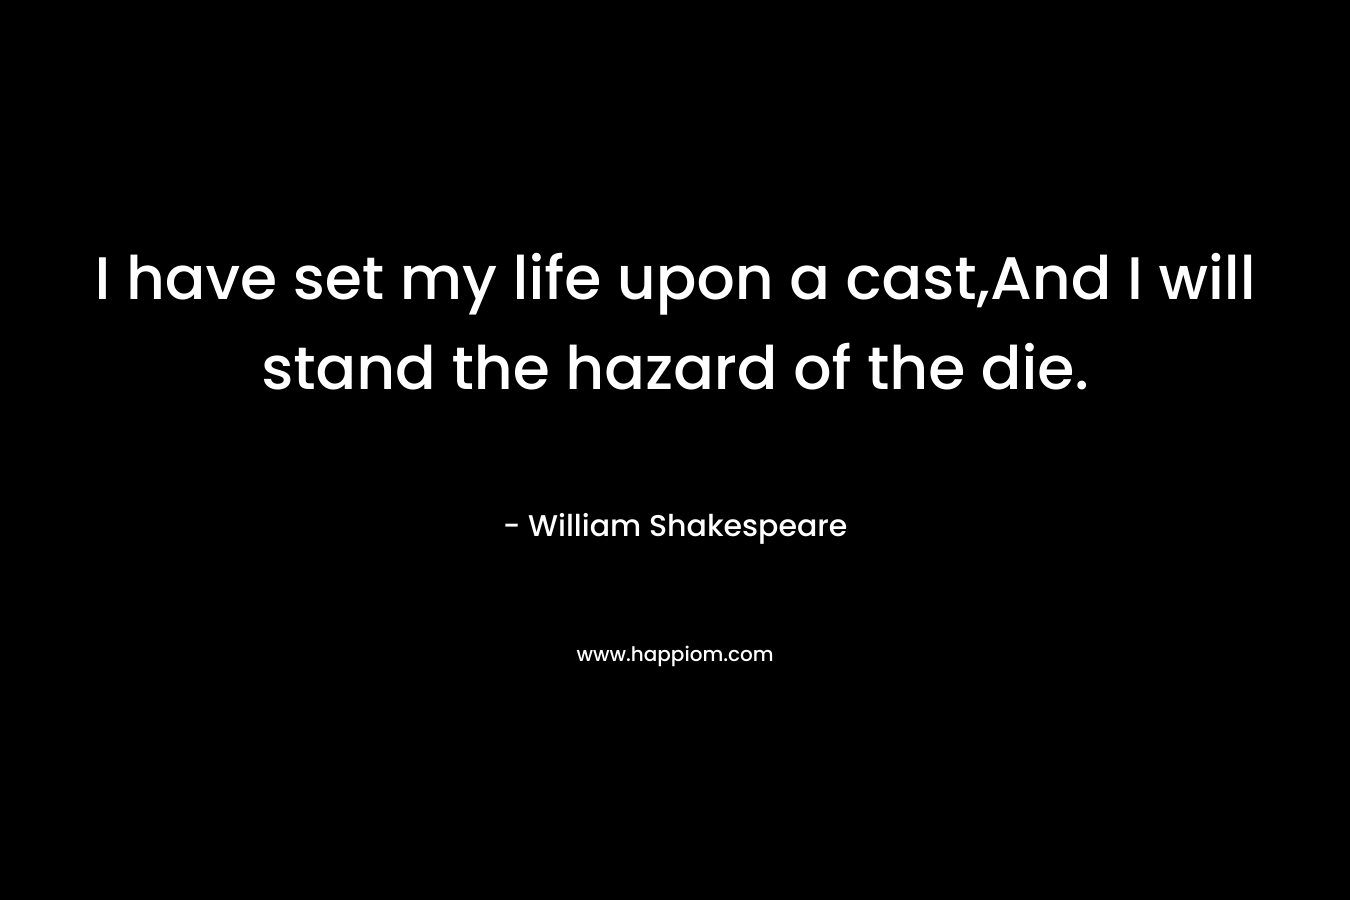 I have set my life upon a cast,And I will stand the hazard of the die.